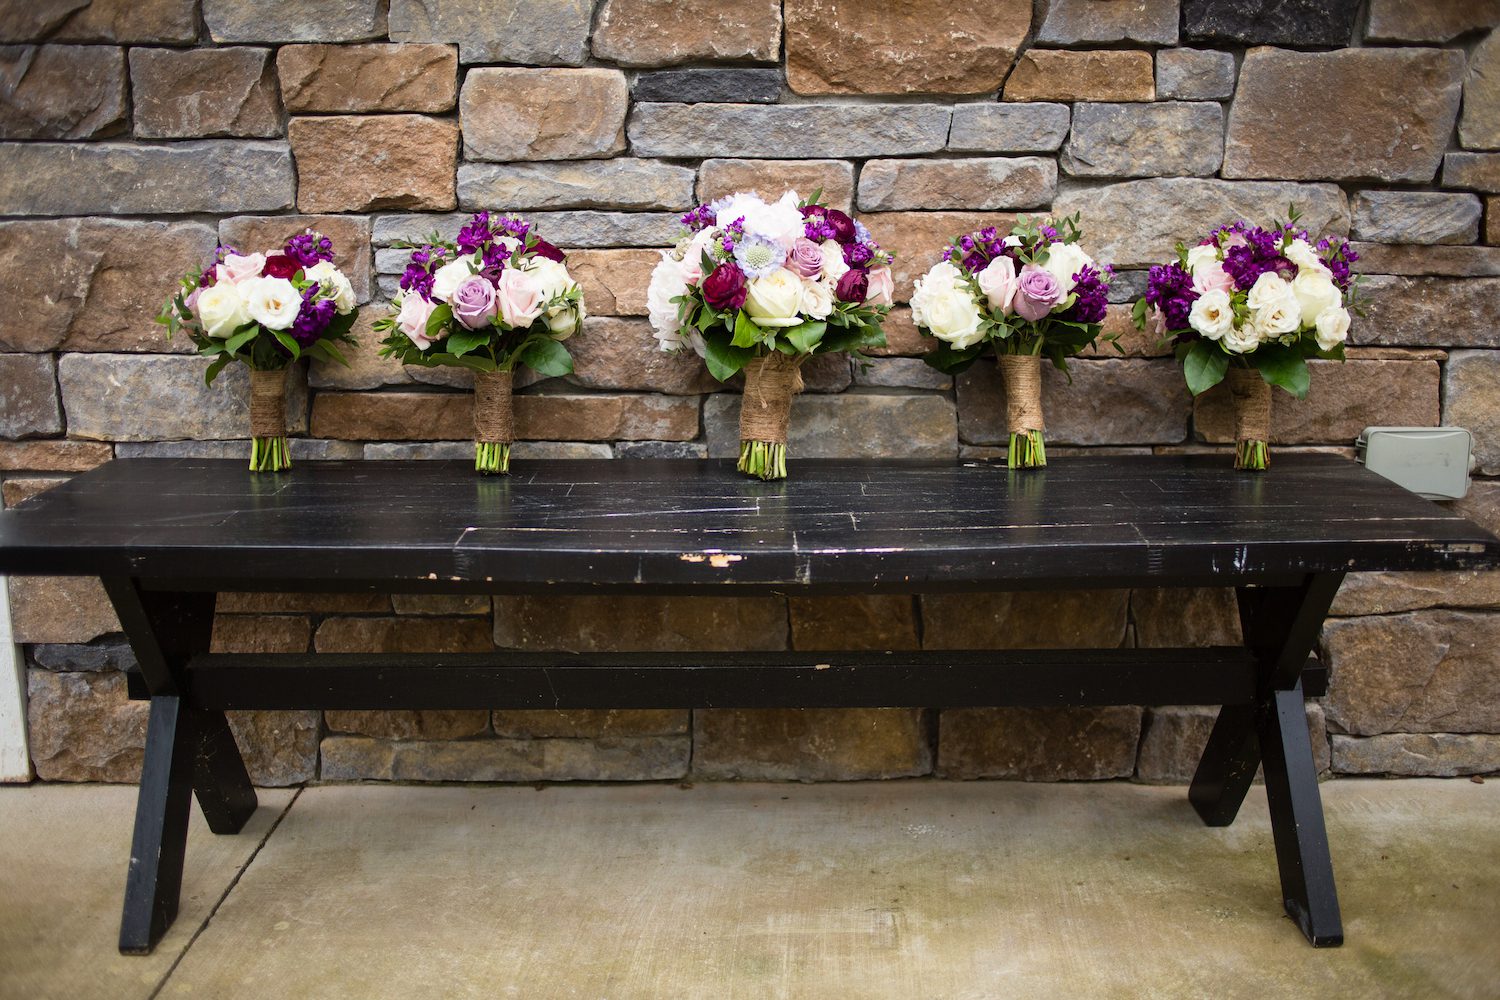 Lepold-Johnson-Bouquets-rustic-table.jpg